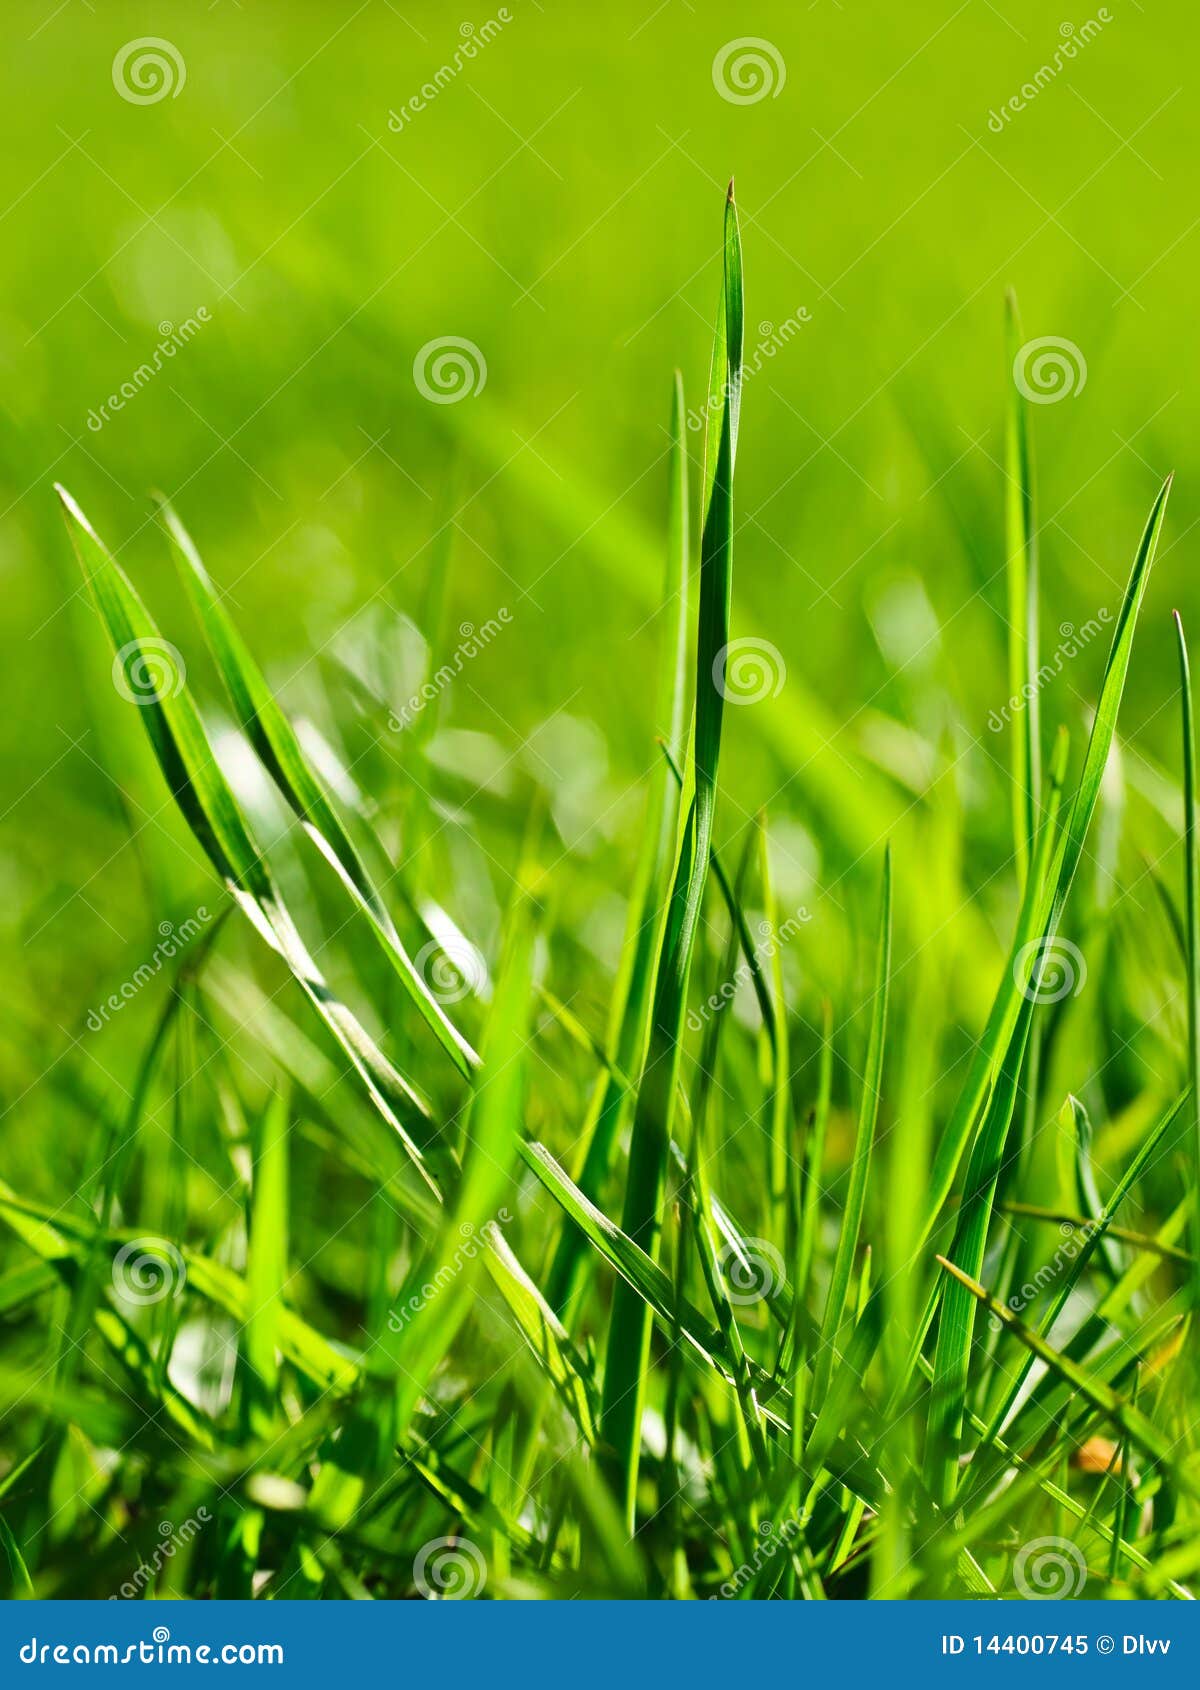 Sunlit grass stock image. Image of abstract, bright, spring - 14400745